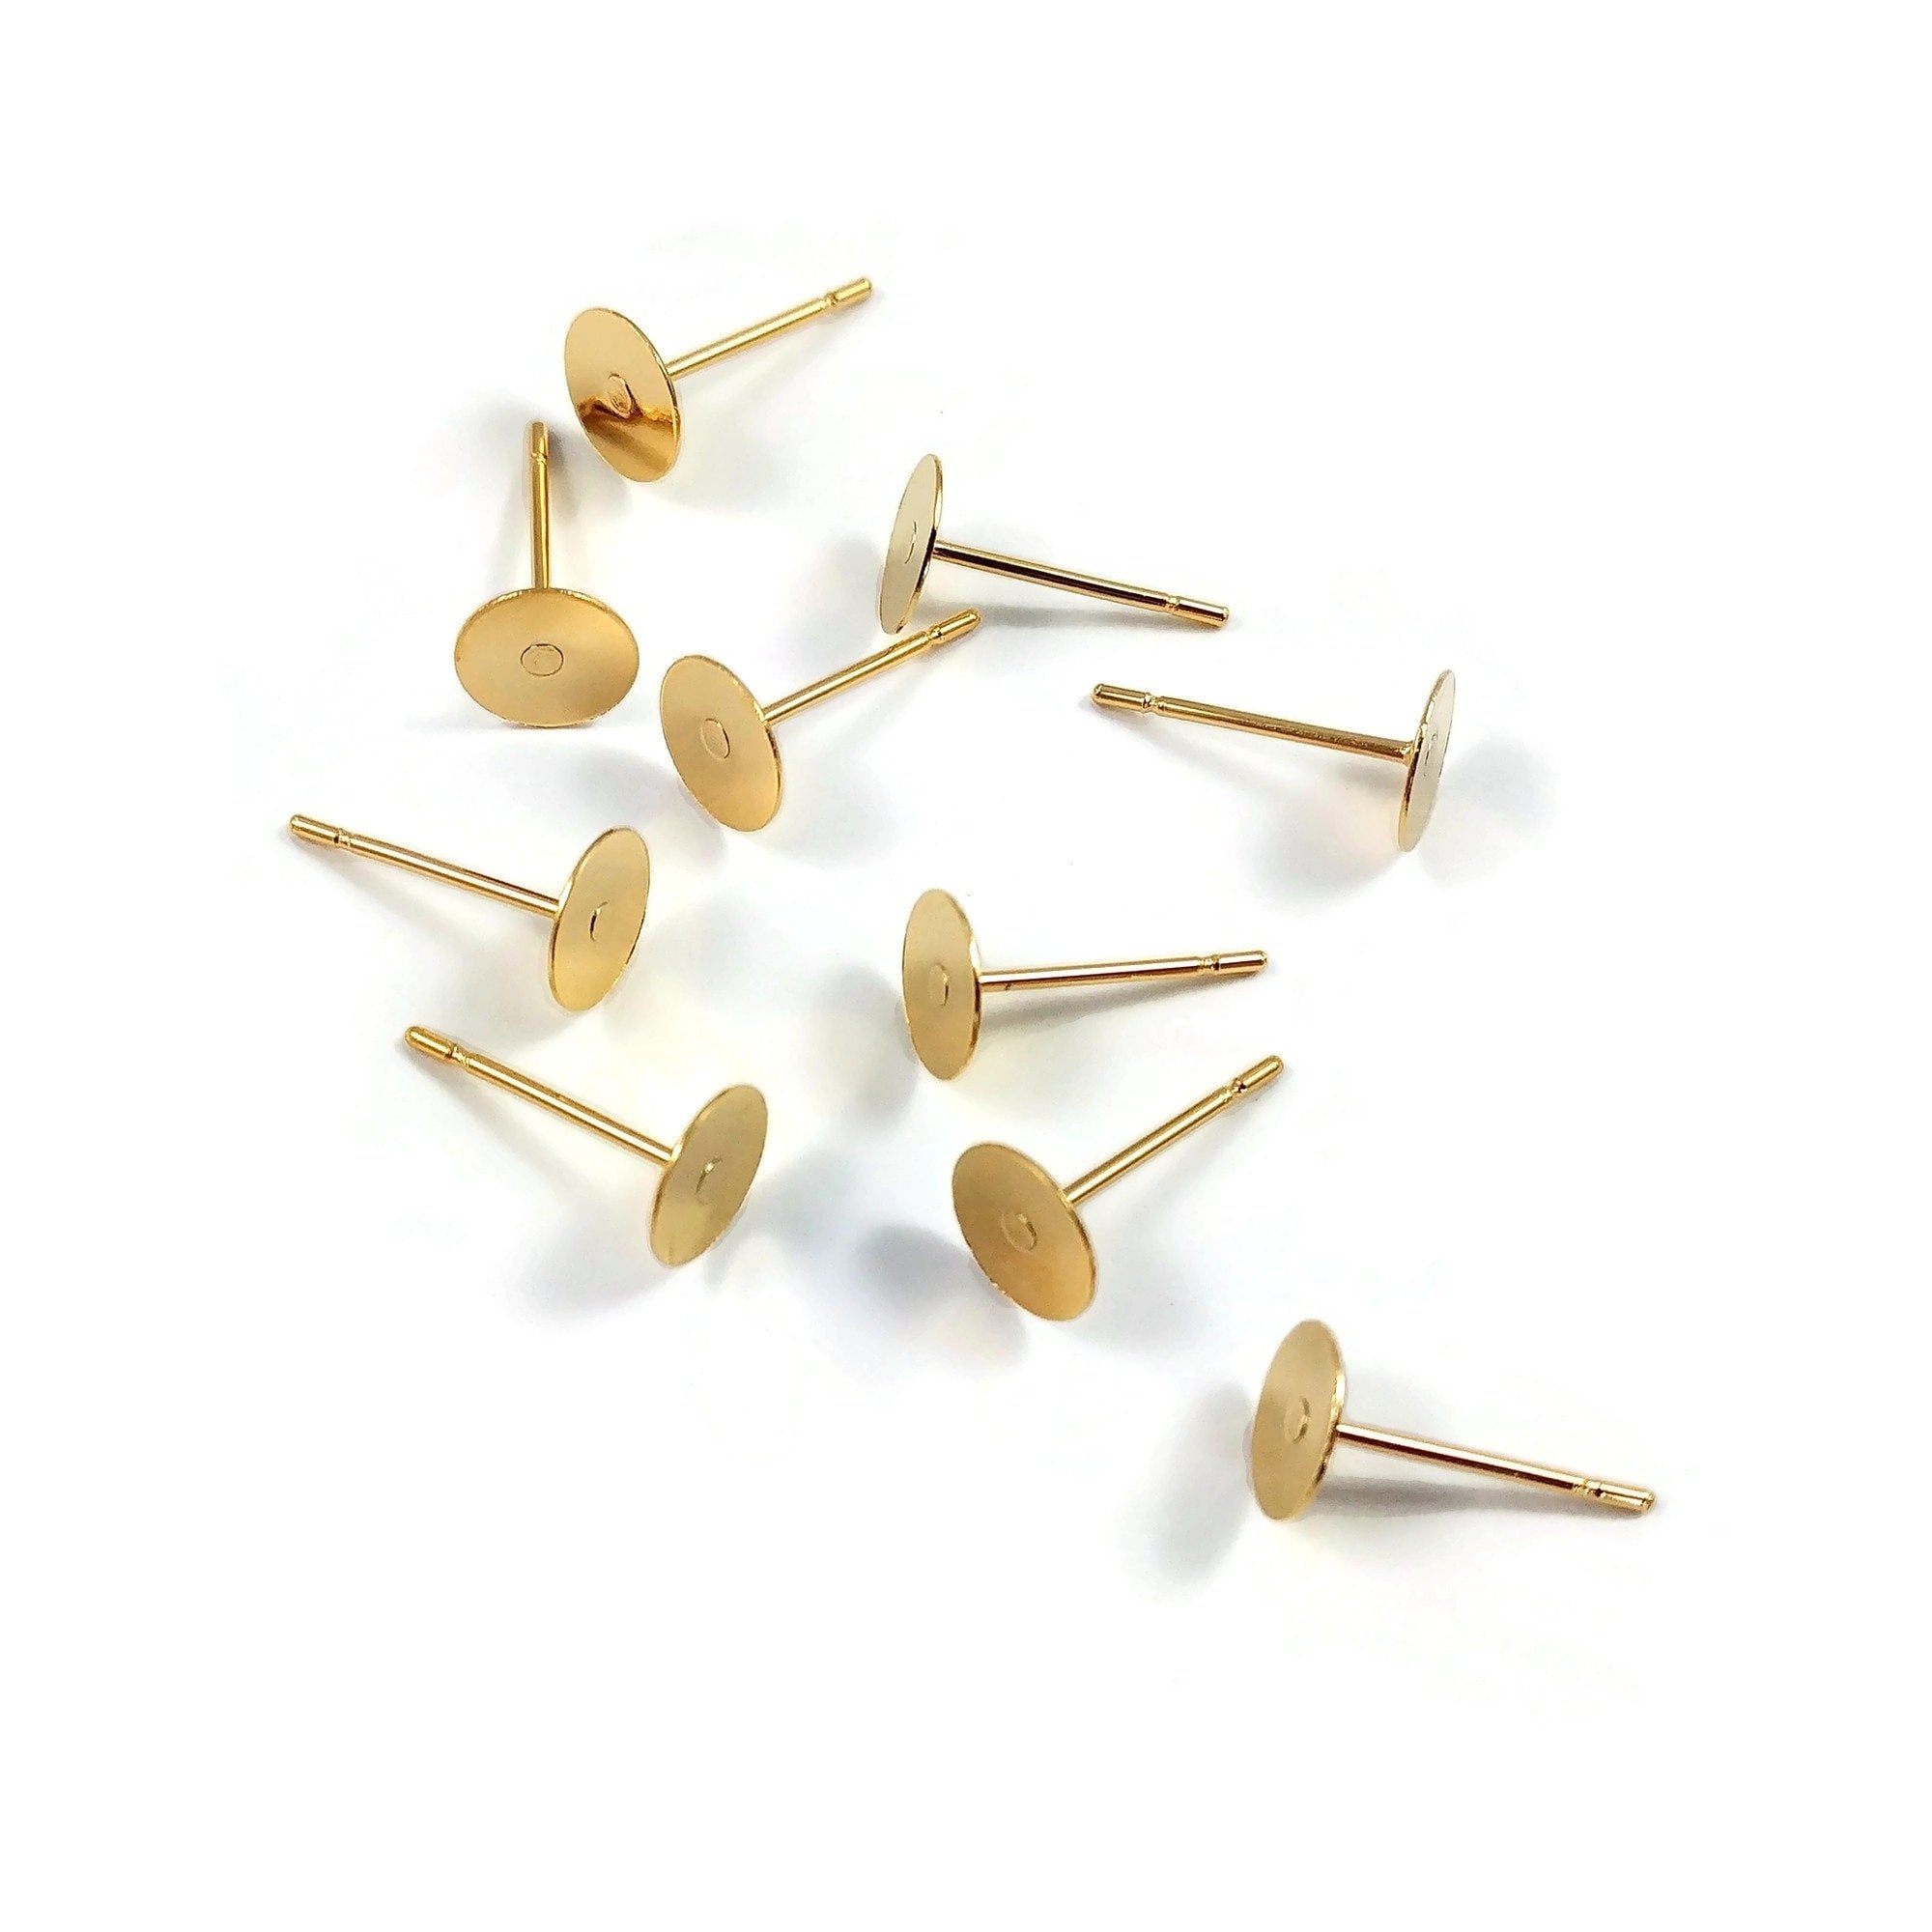 24K gold plated earring post, 6mm stainless steel flat pad studs, 50pcs (25 pairs) blank parts for jewelry making